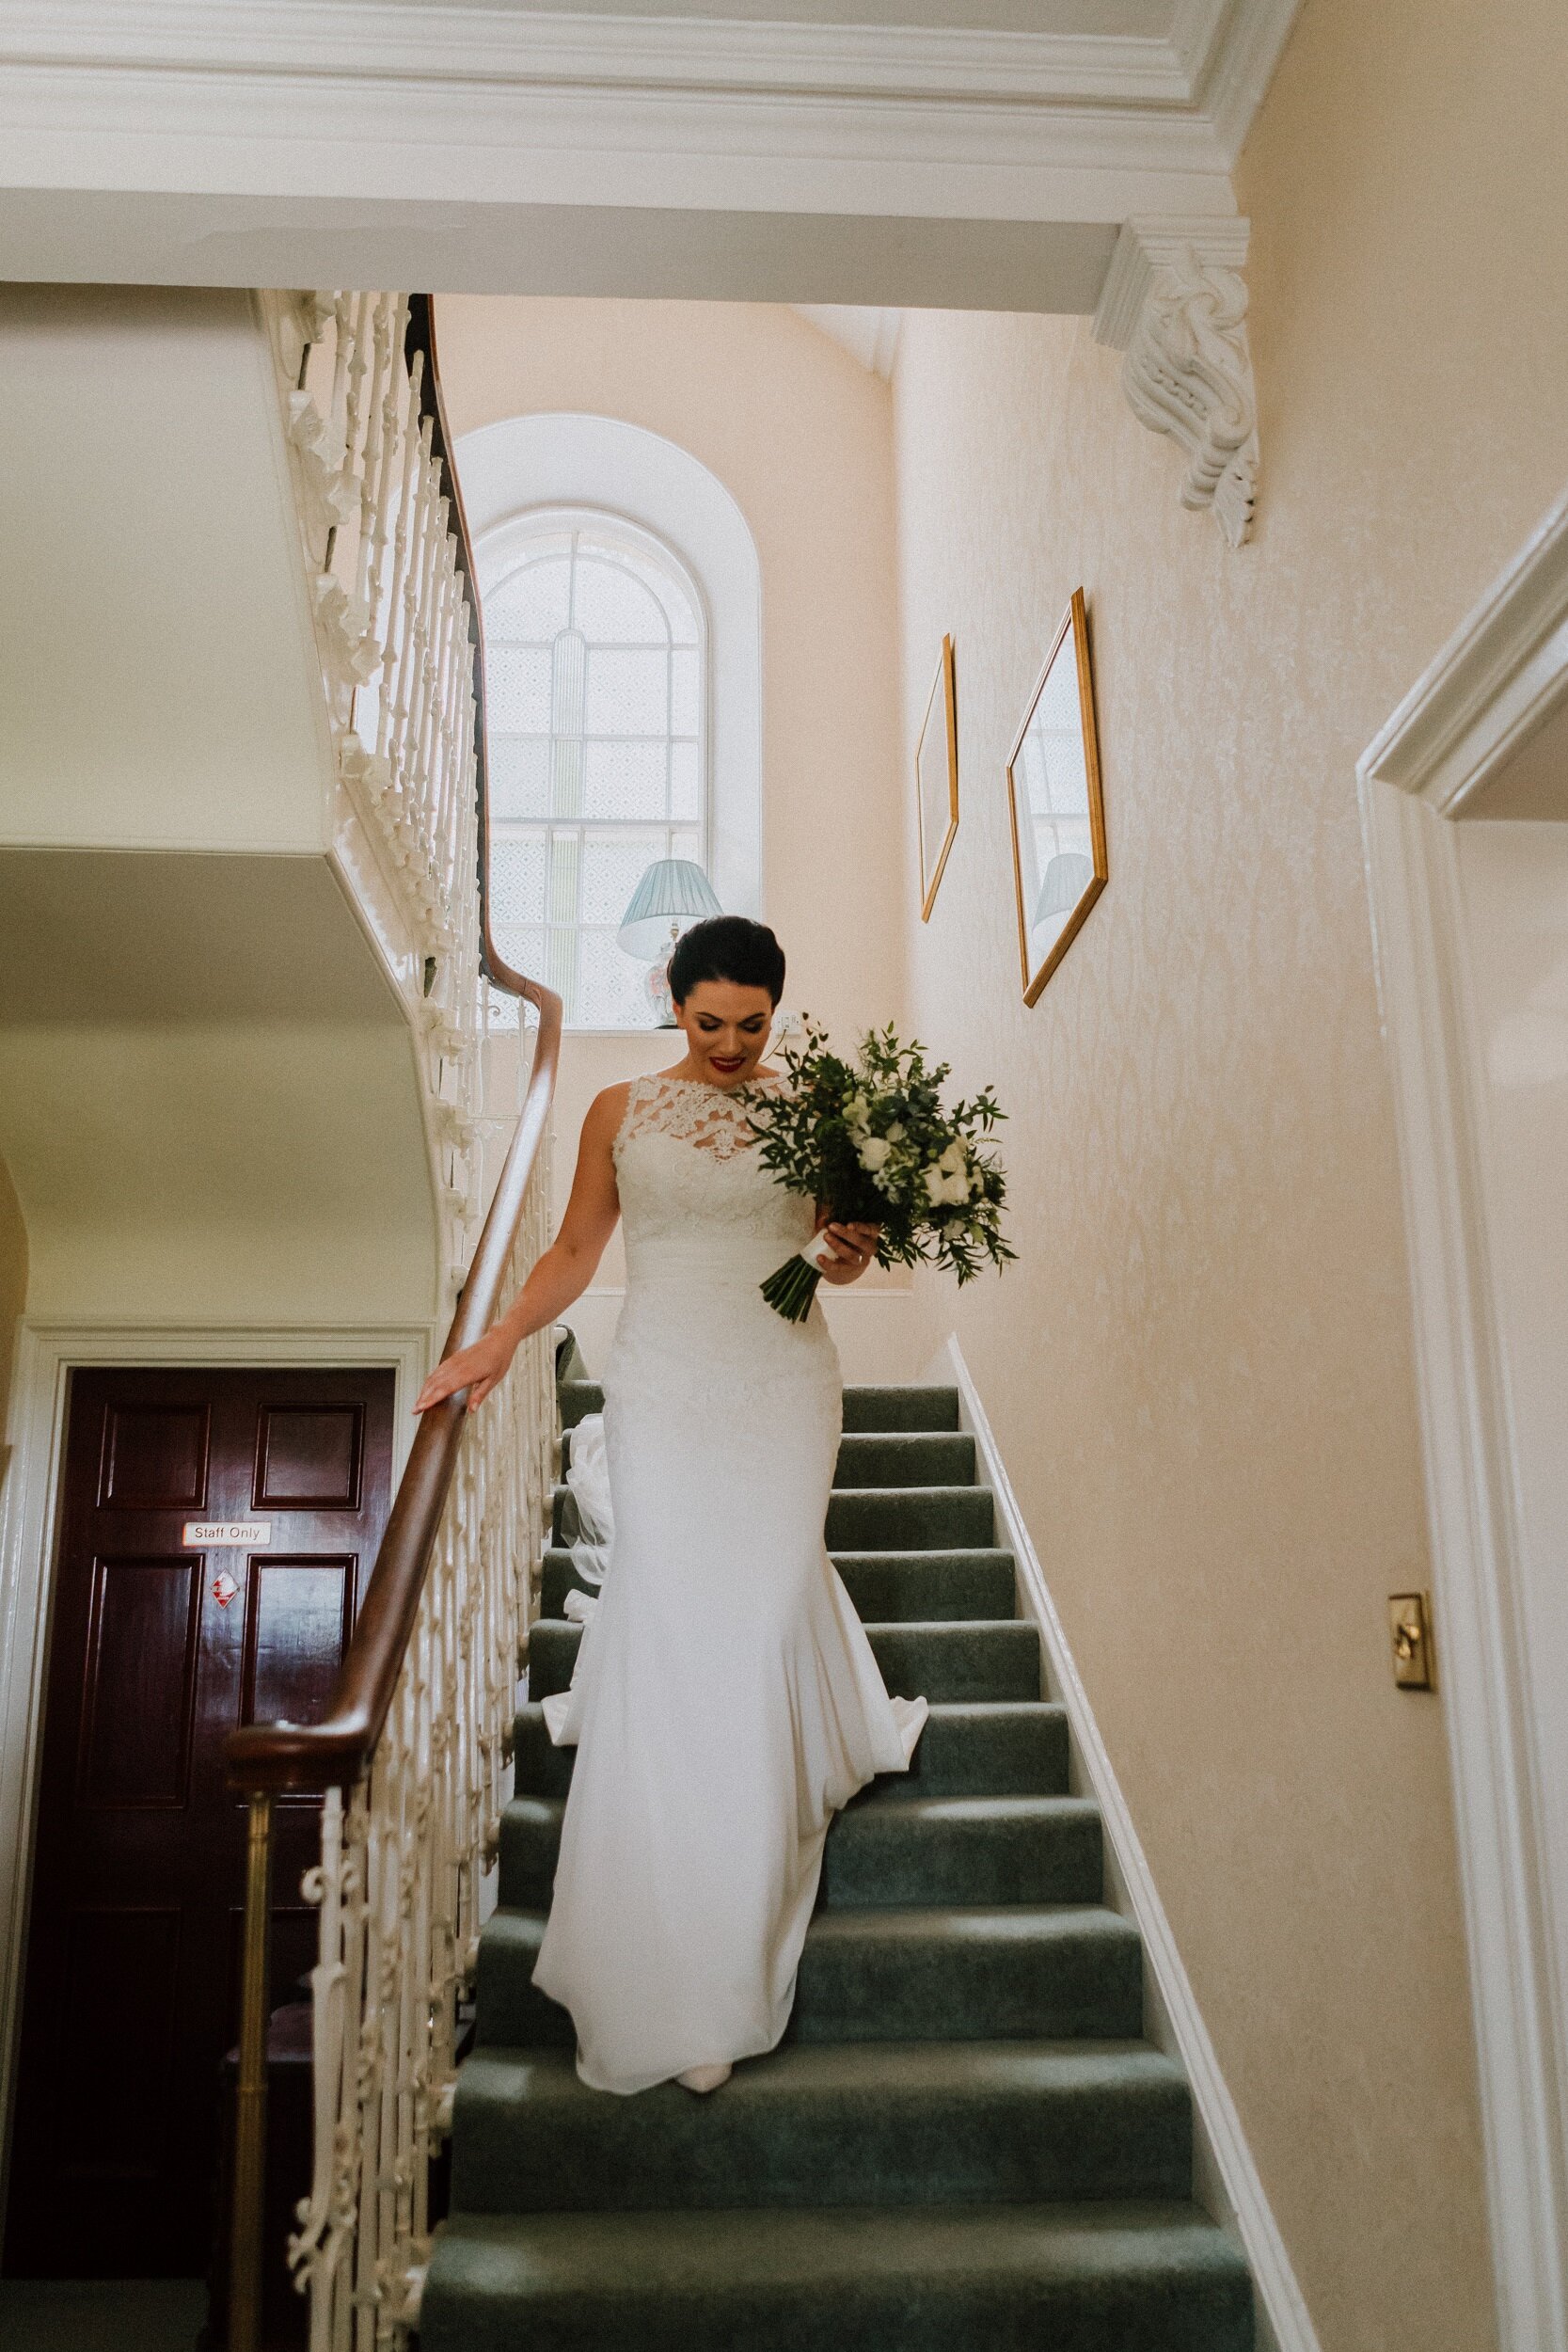 Bride coming down the staircase at Bachilton Barn, Perthshire